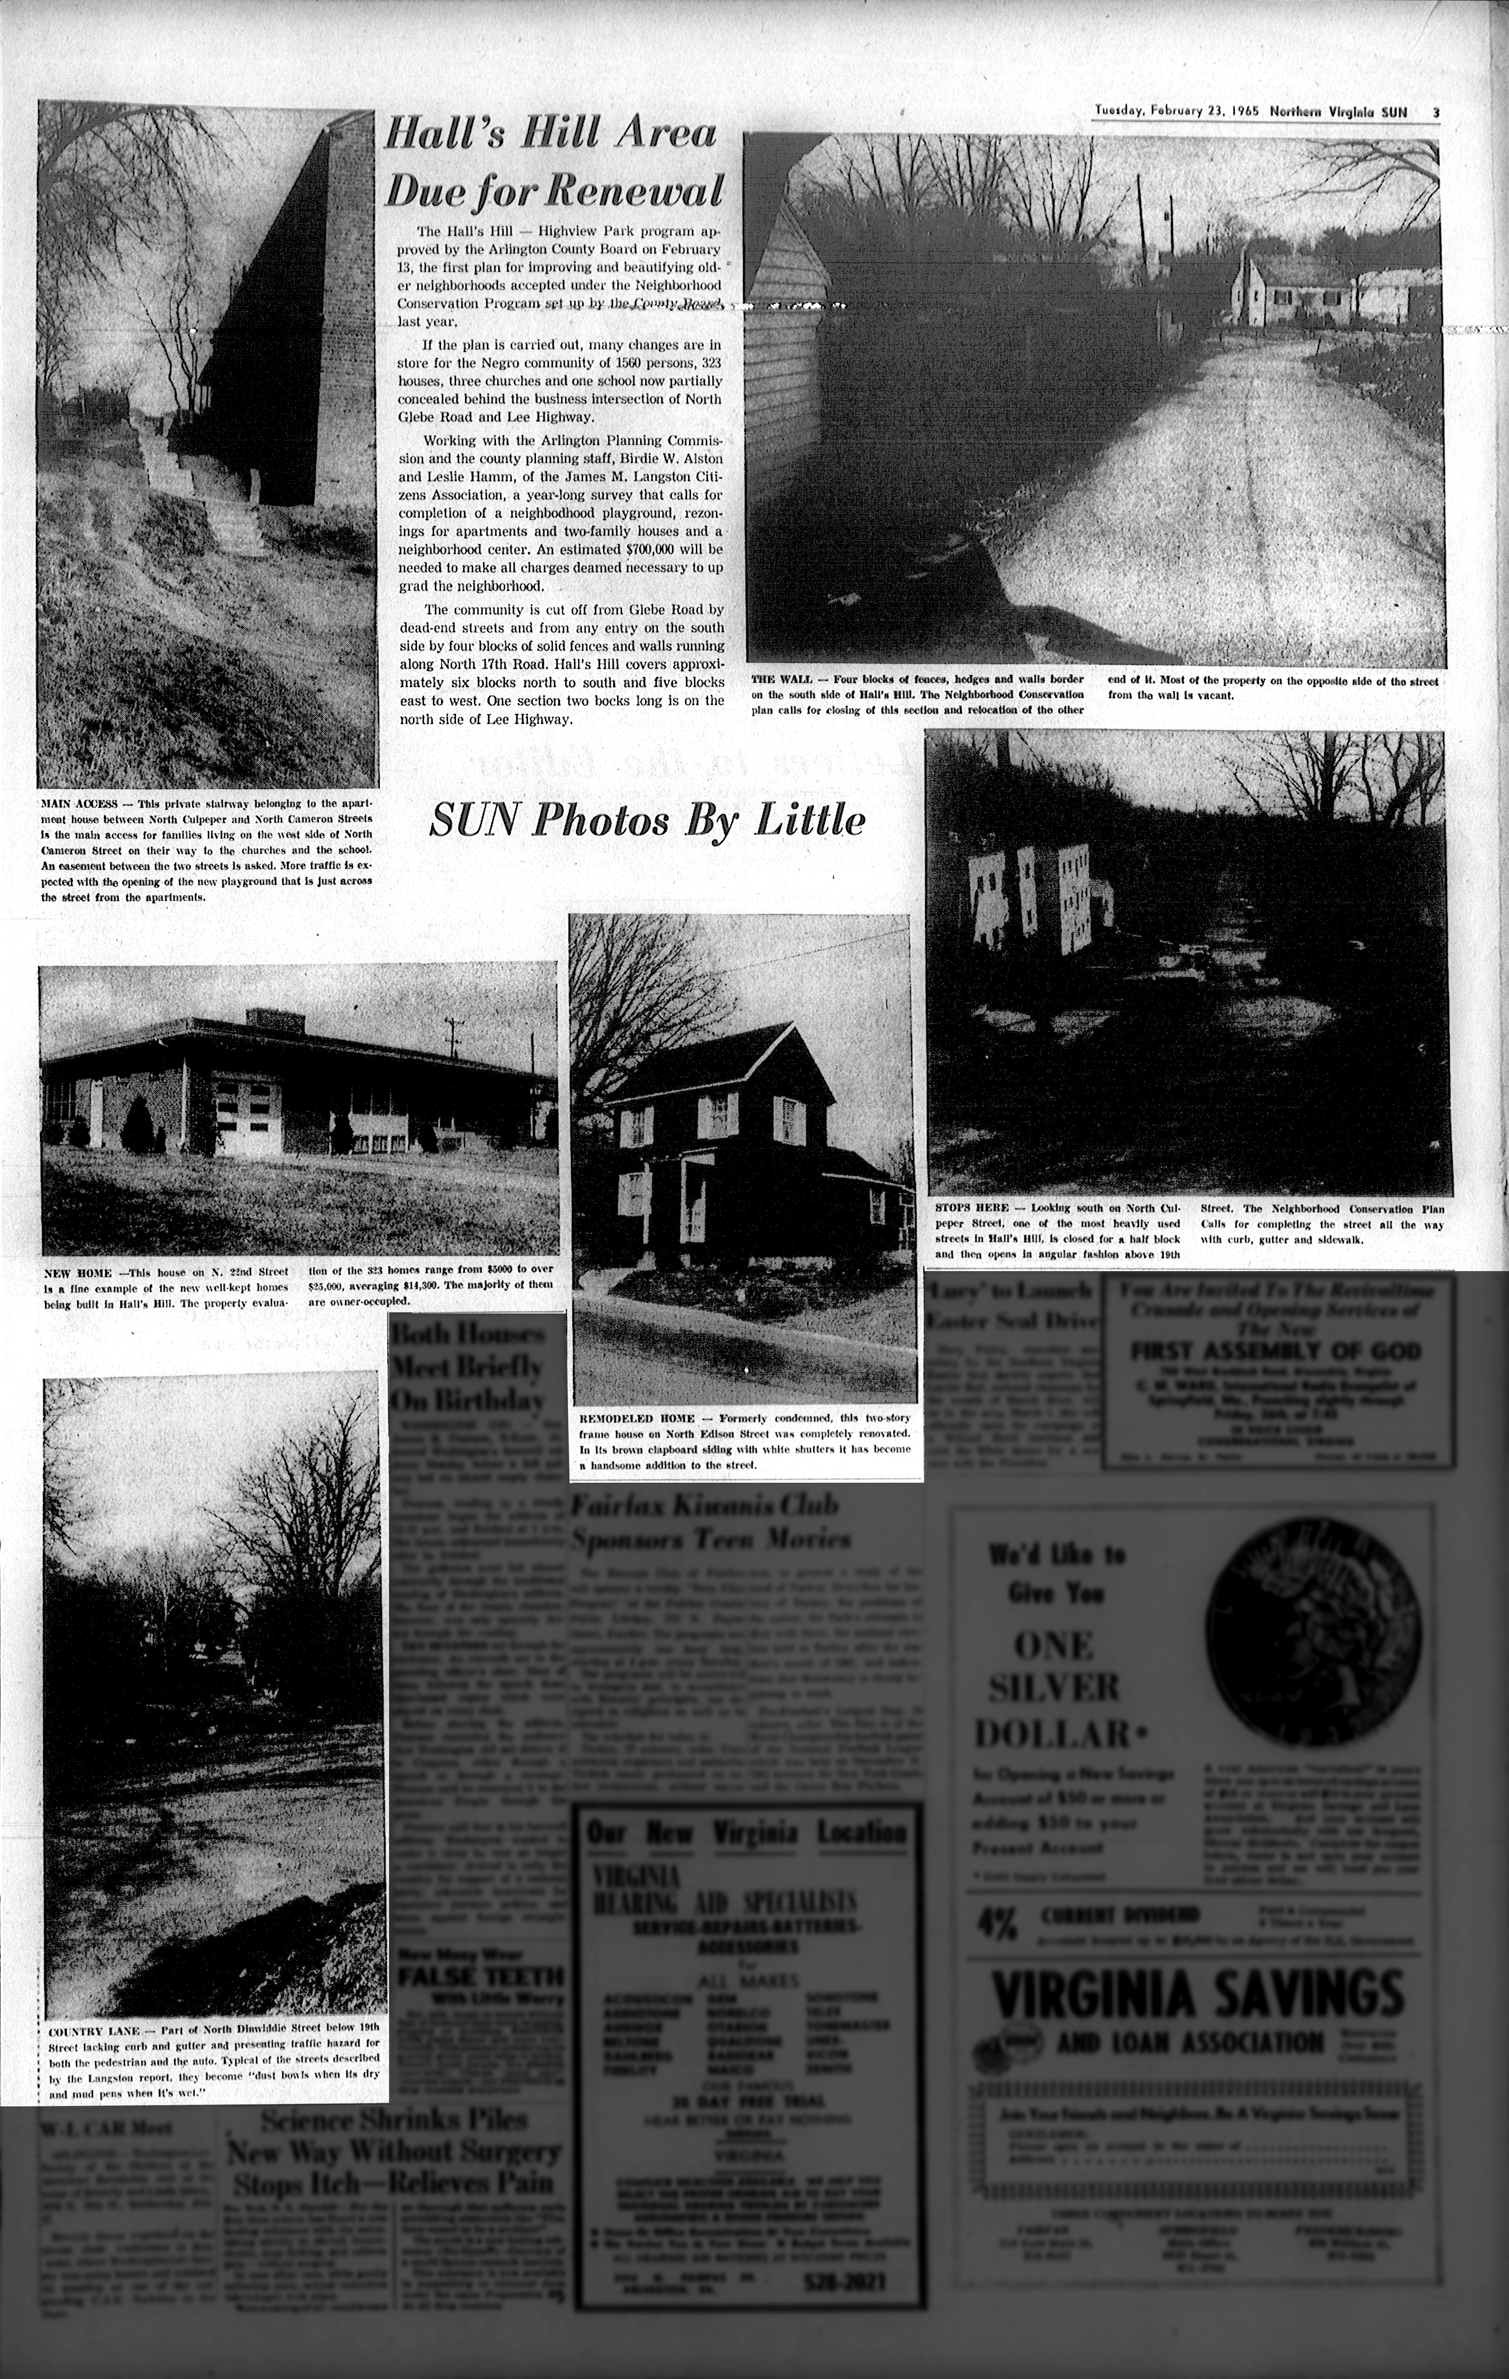 Article: "Hall's Hill Area Due for Renewal", Northern Virginia Sun, 23 February 1965: "...Negro community of 1650 persons, 322 houses, three churches, and a school... The community is cut off from Glebe Road by dead-end streets and from any entry on the south side by four blocks of solid fences and walls running along North 17th Street." Source: Virginia Chronicle, Library of Virginia.